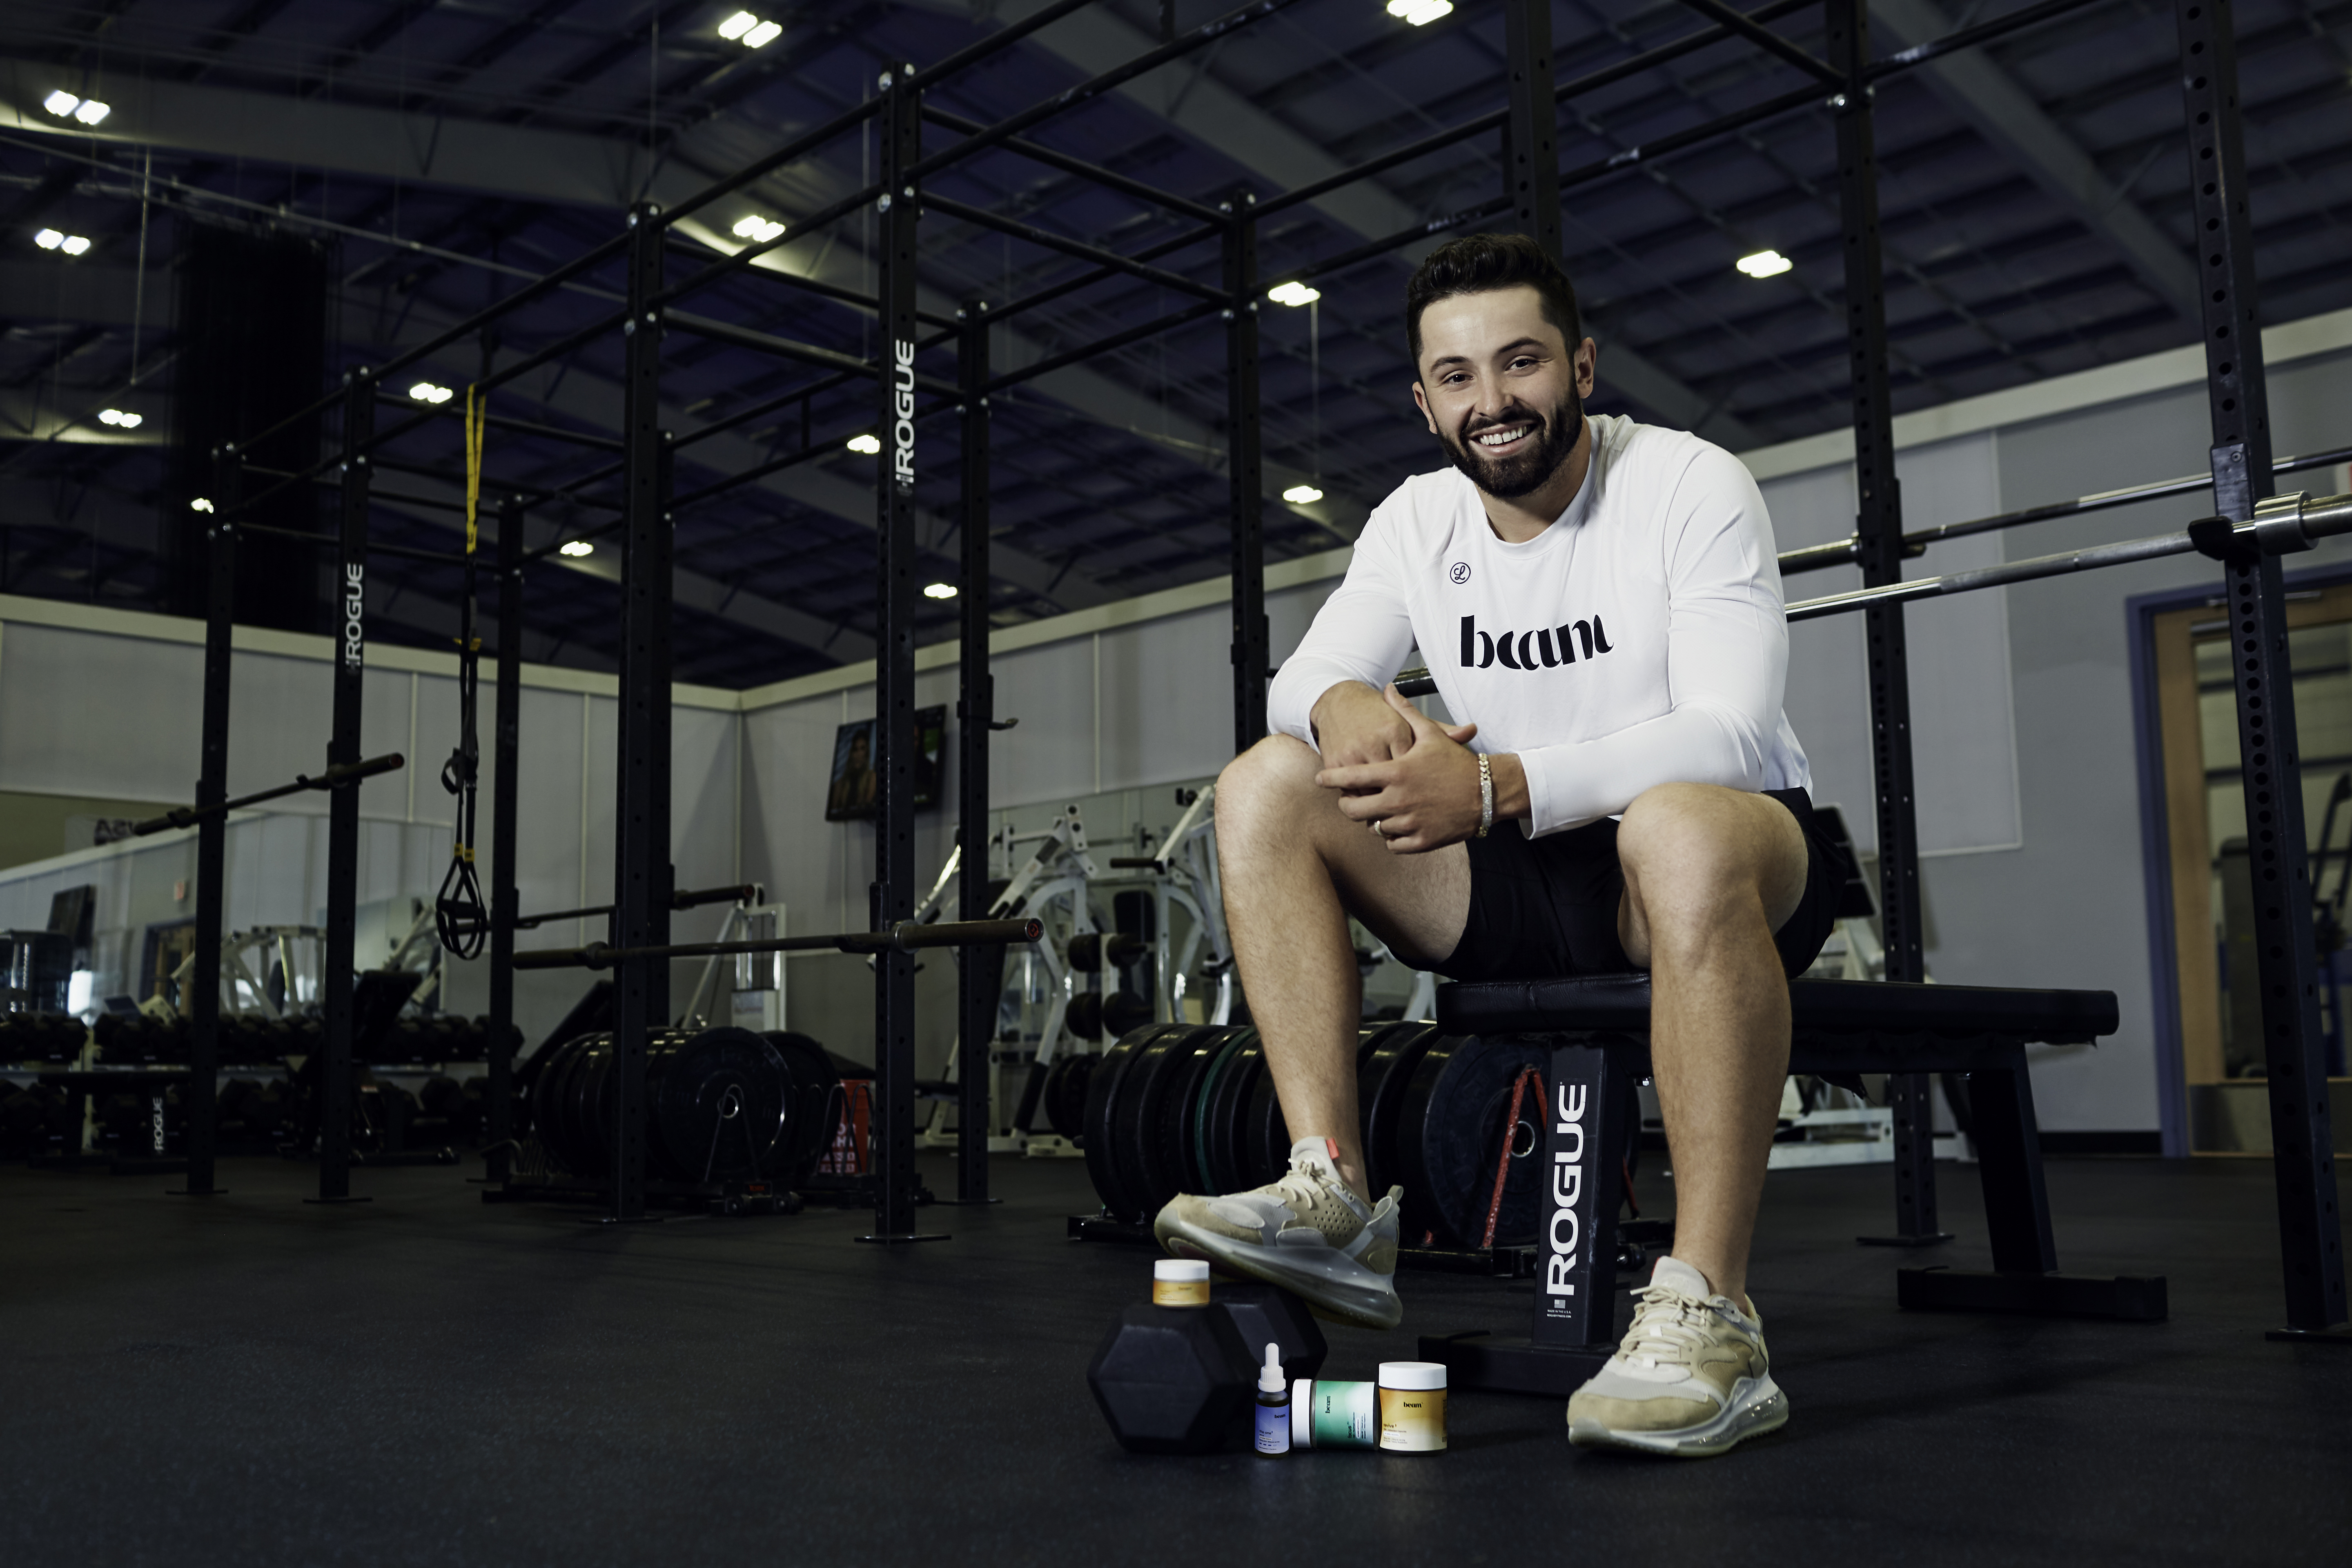 Baker Mayfield with beam CBD products.